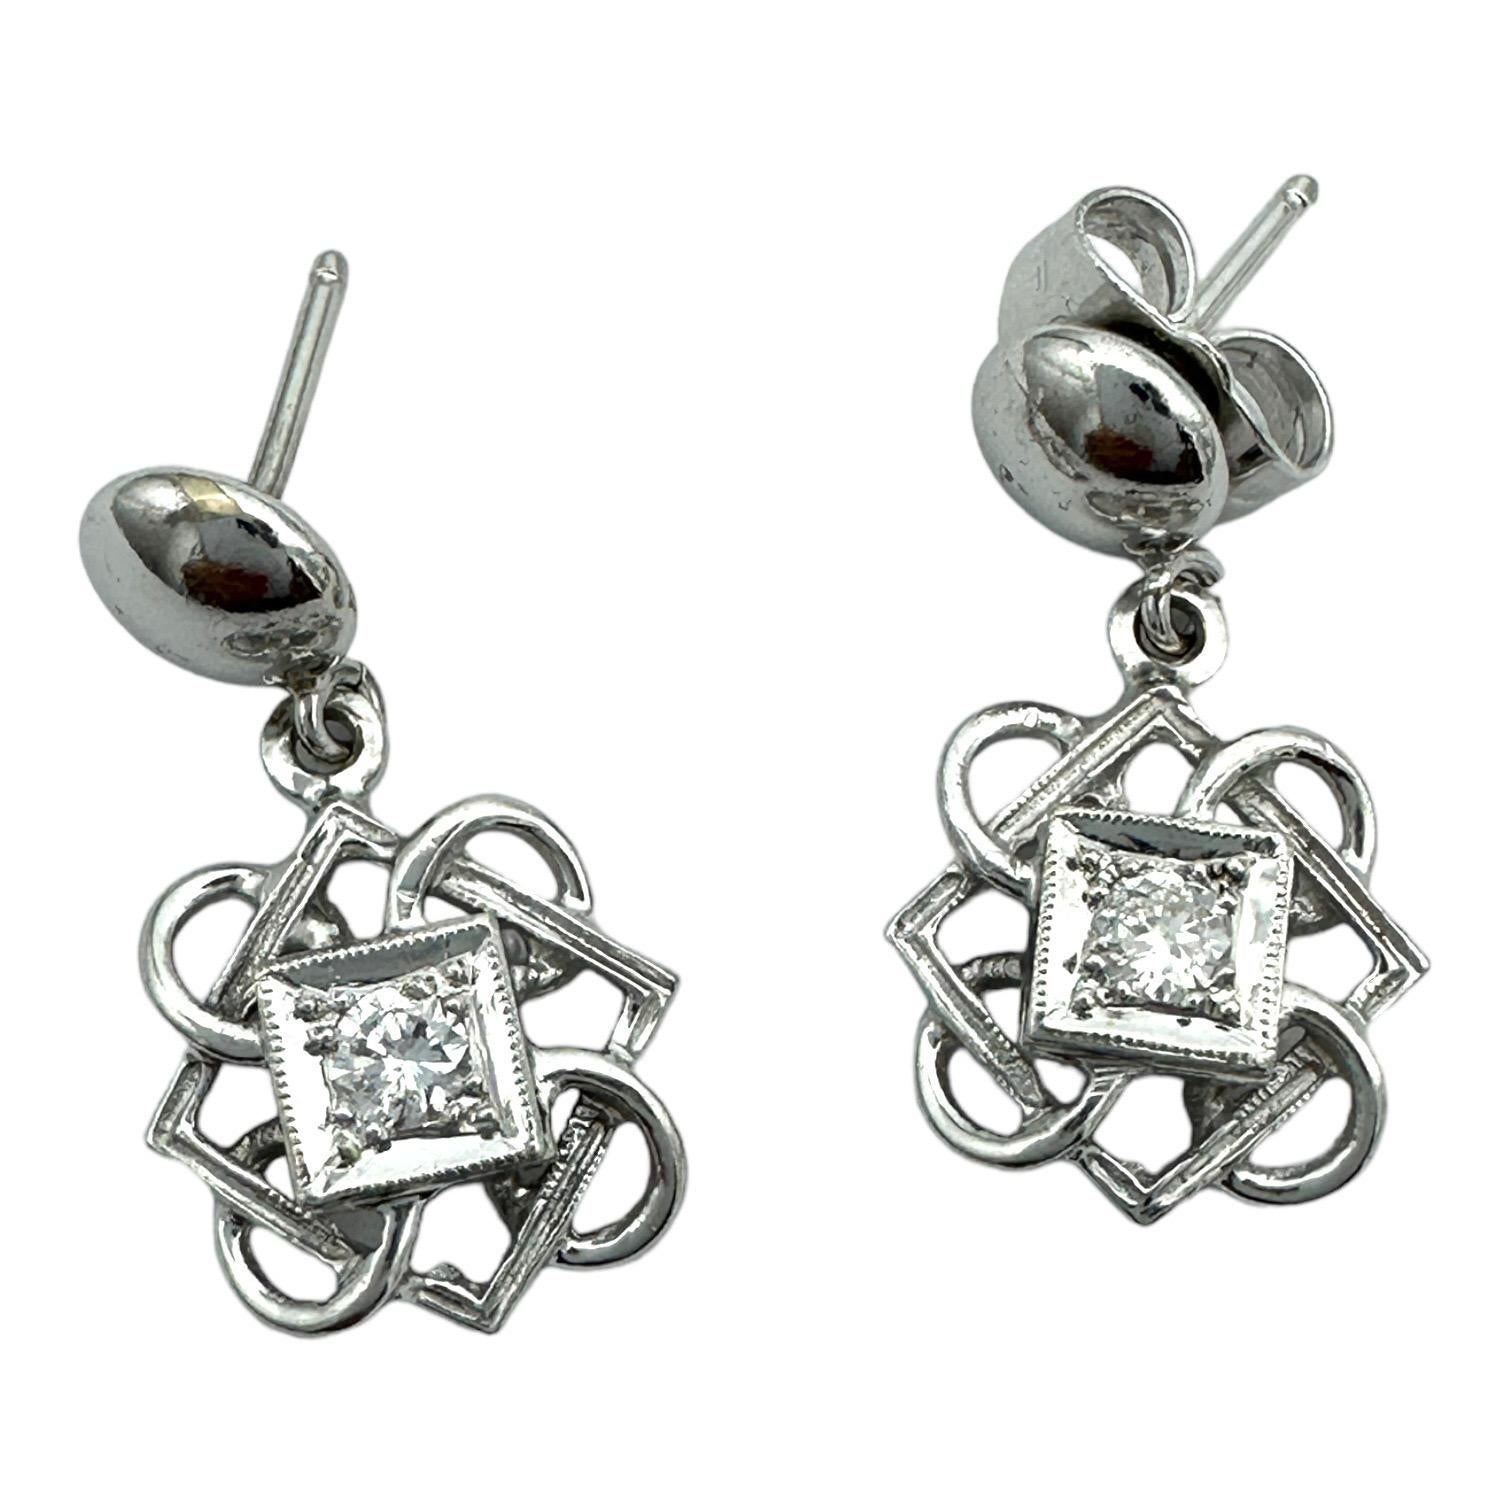 Show your style with these 14k white gold Celtic diamond dangle earrings. Crafted with the finest stones, these earrings feature two Celtic diamonds that will make a statement. Enjoy the beauty of classic Celtic design with a modern spin.
14-karat